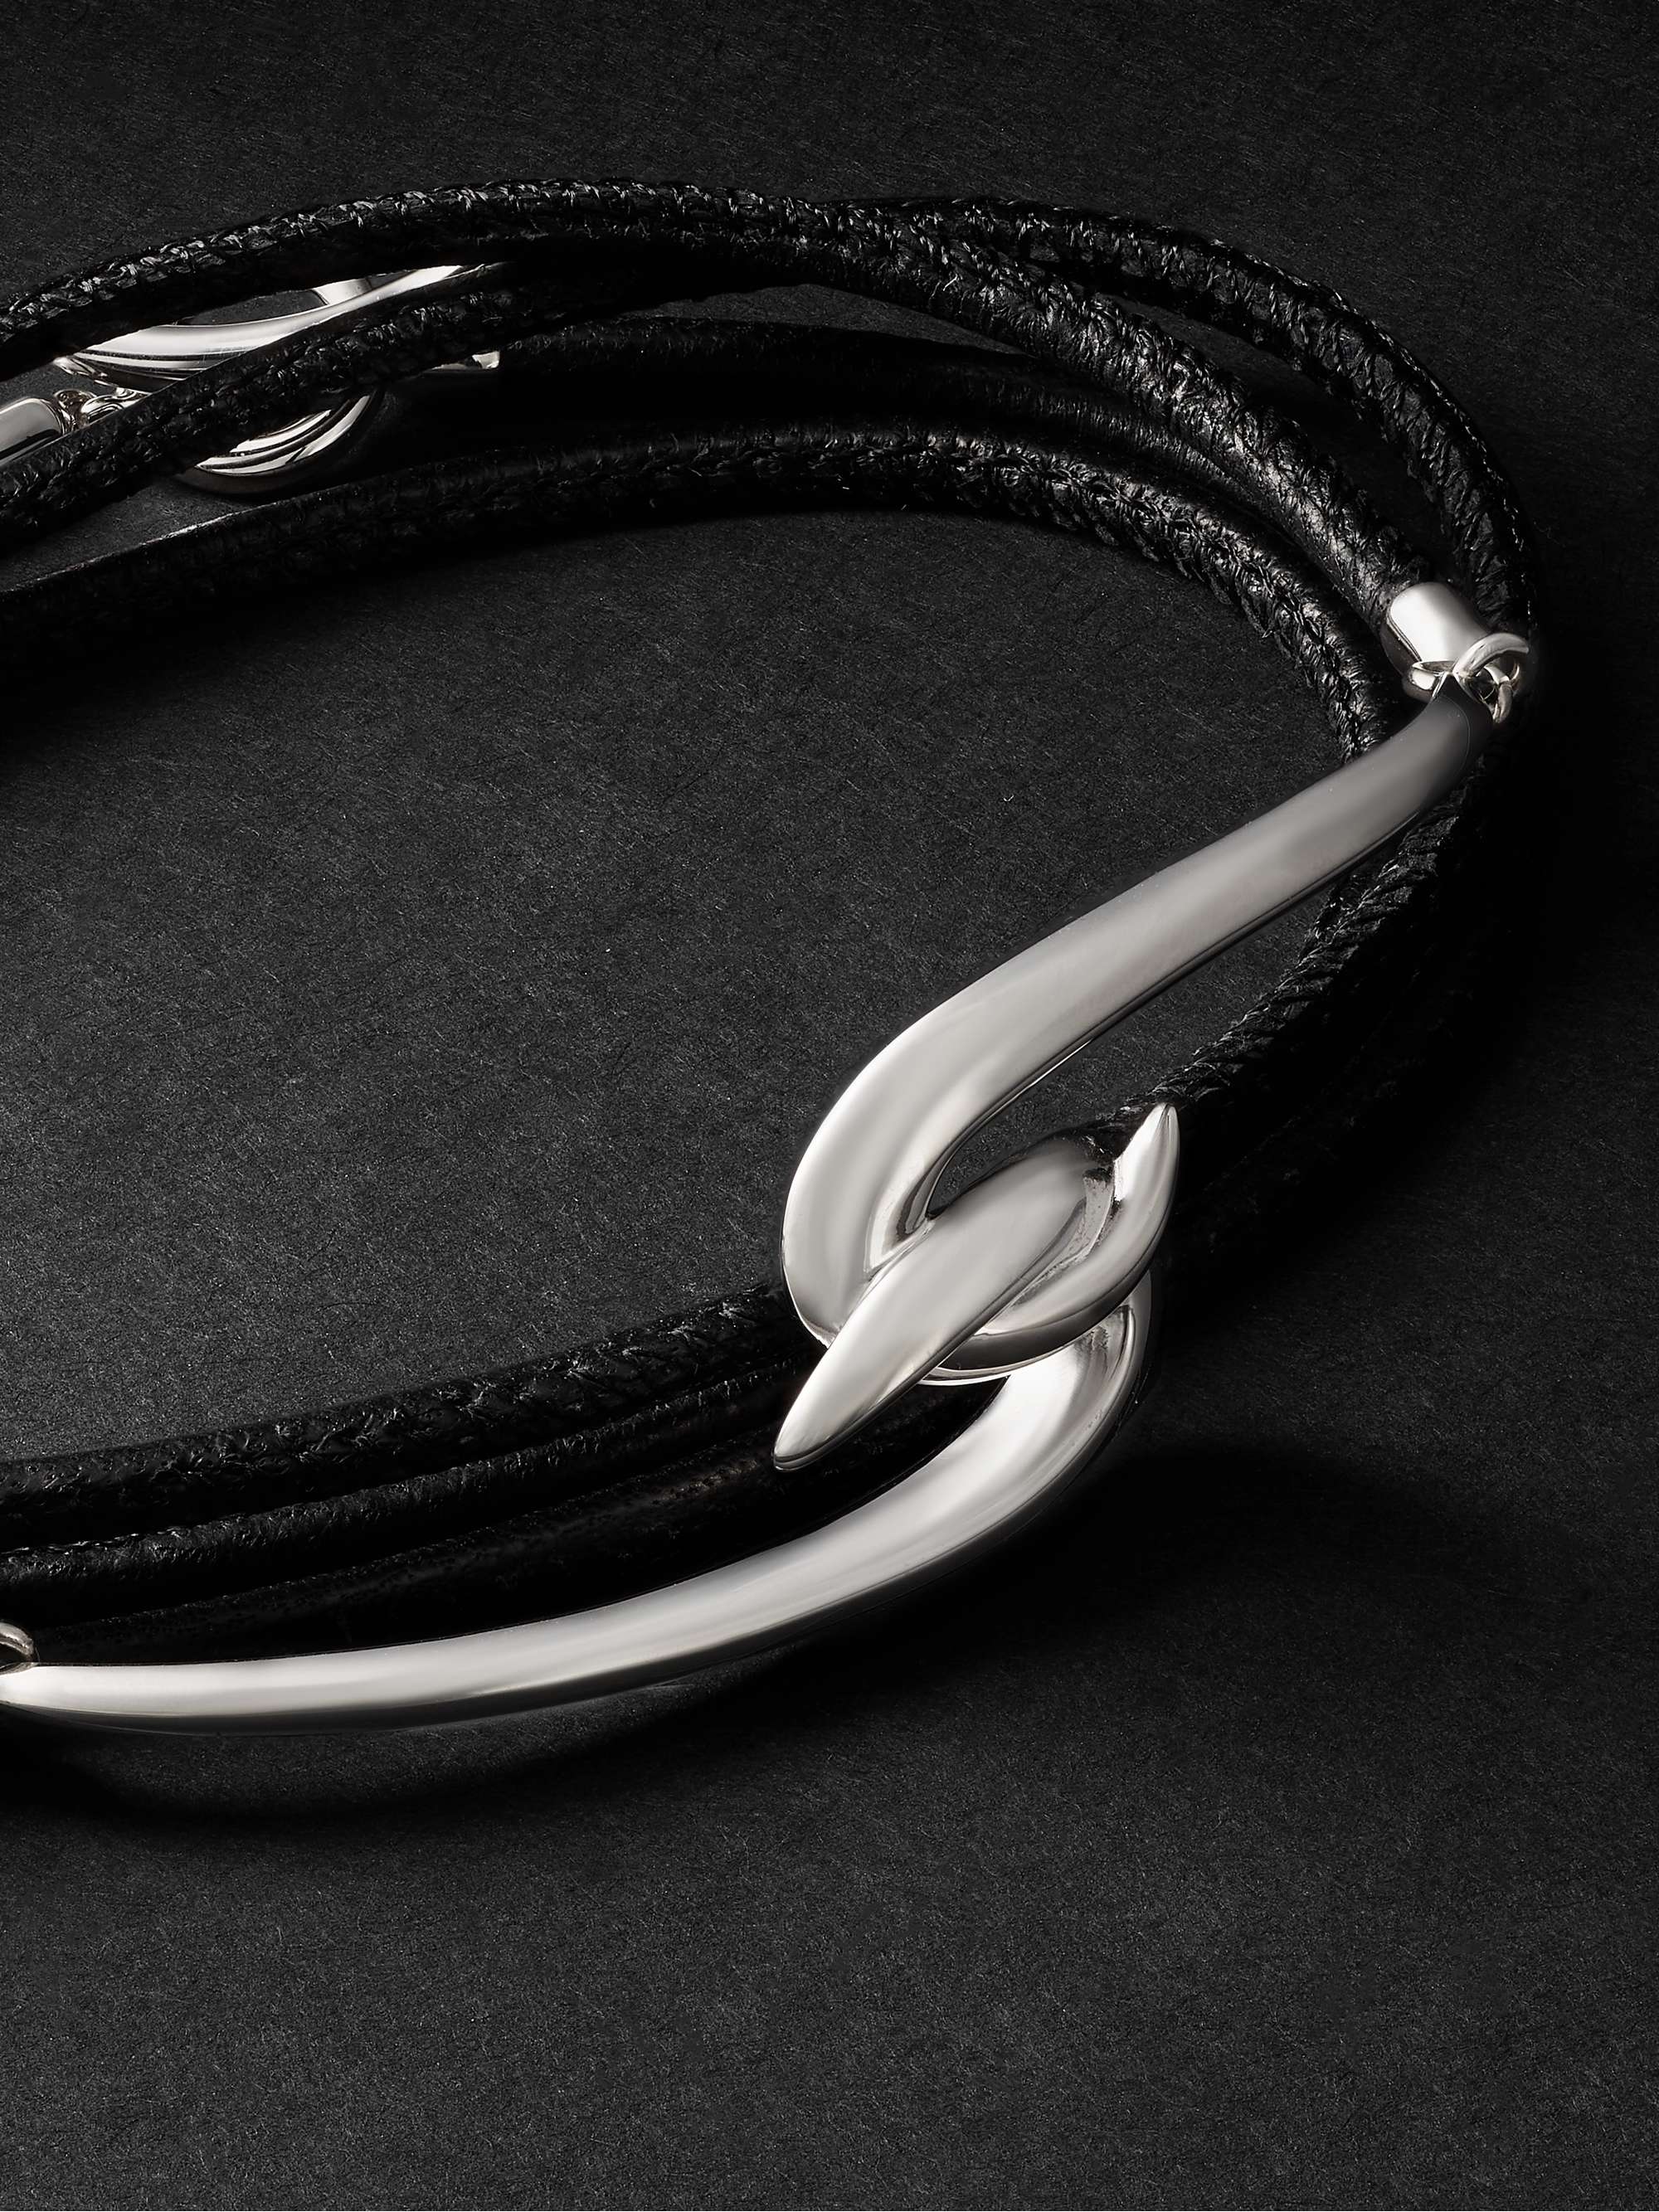 SHAUN LEANE Sterling Silver and Leather Wrap Bracelet